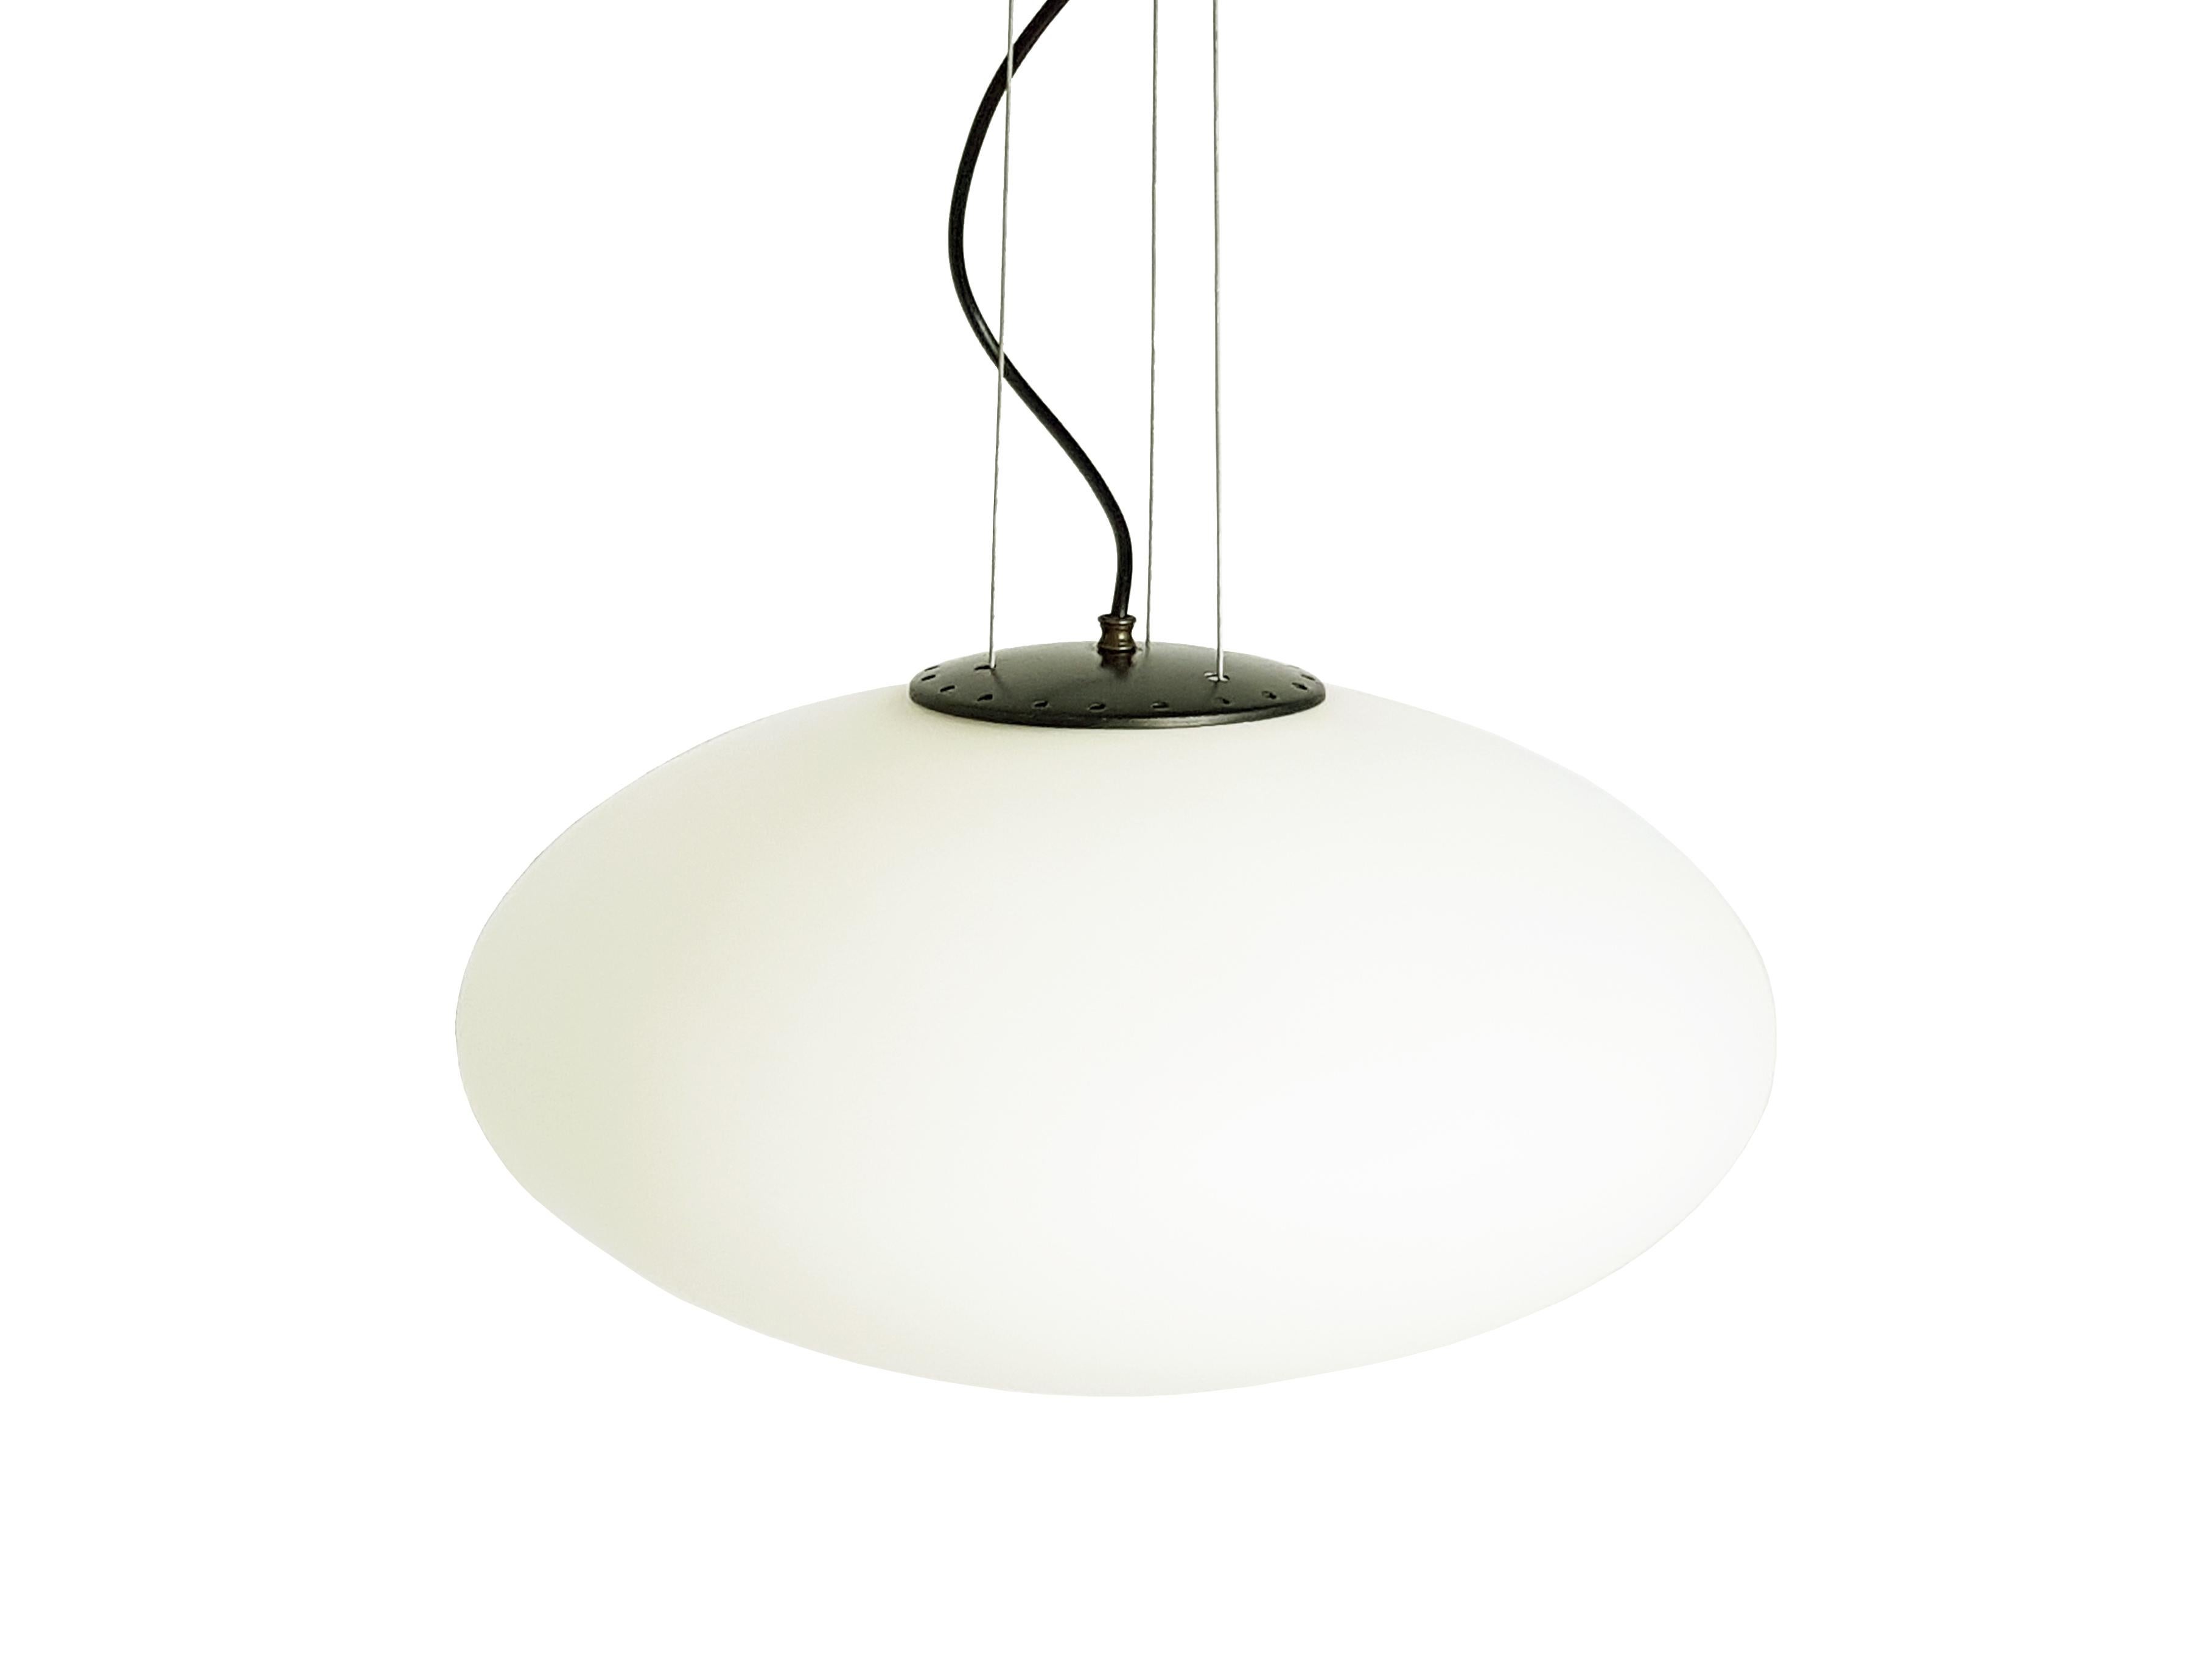 This Italian pendant was produced around the 1960s in the style of Stilnovo.
It is made from a white oval glass sandblasted shade with black metal and brass ceiling and cover. The lamp is equipped with one light socket (E27 standard) and remains in